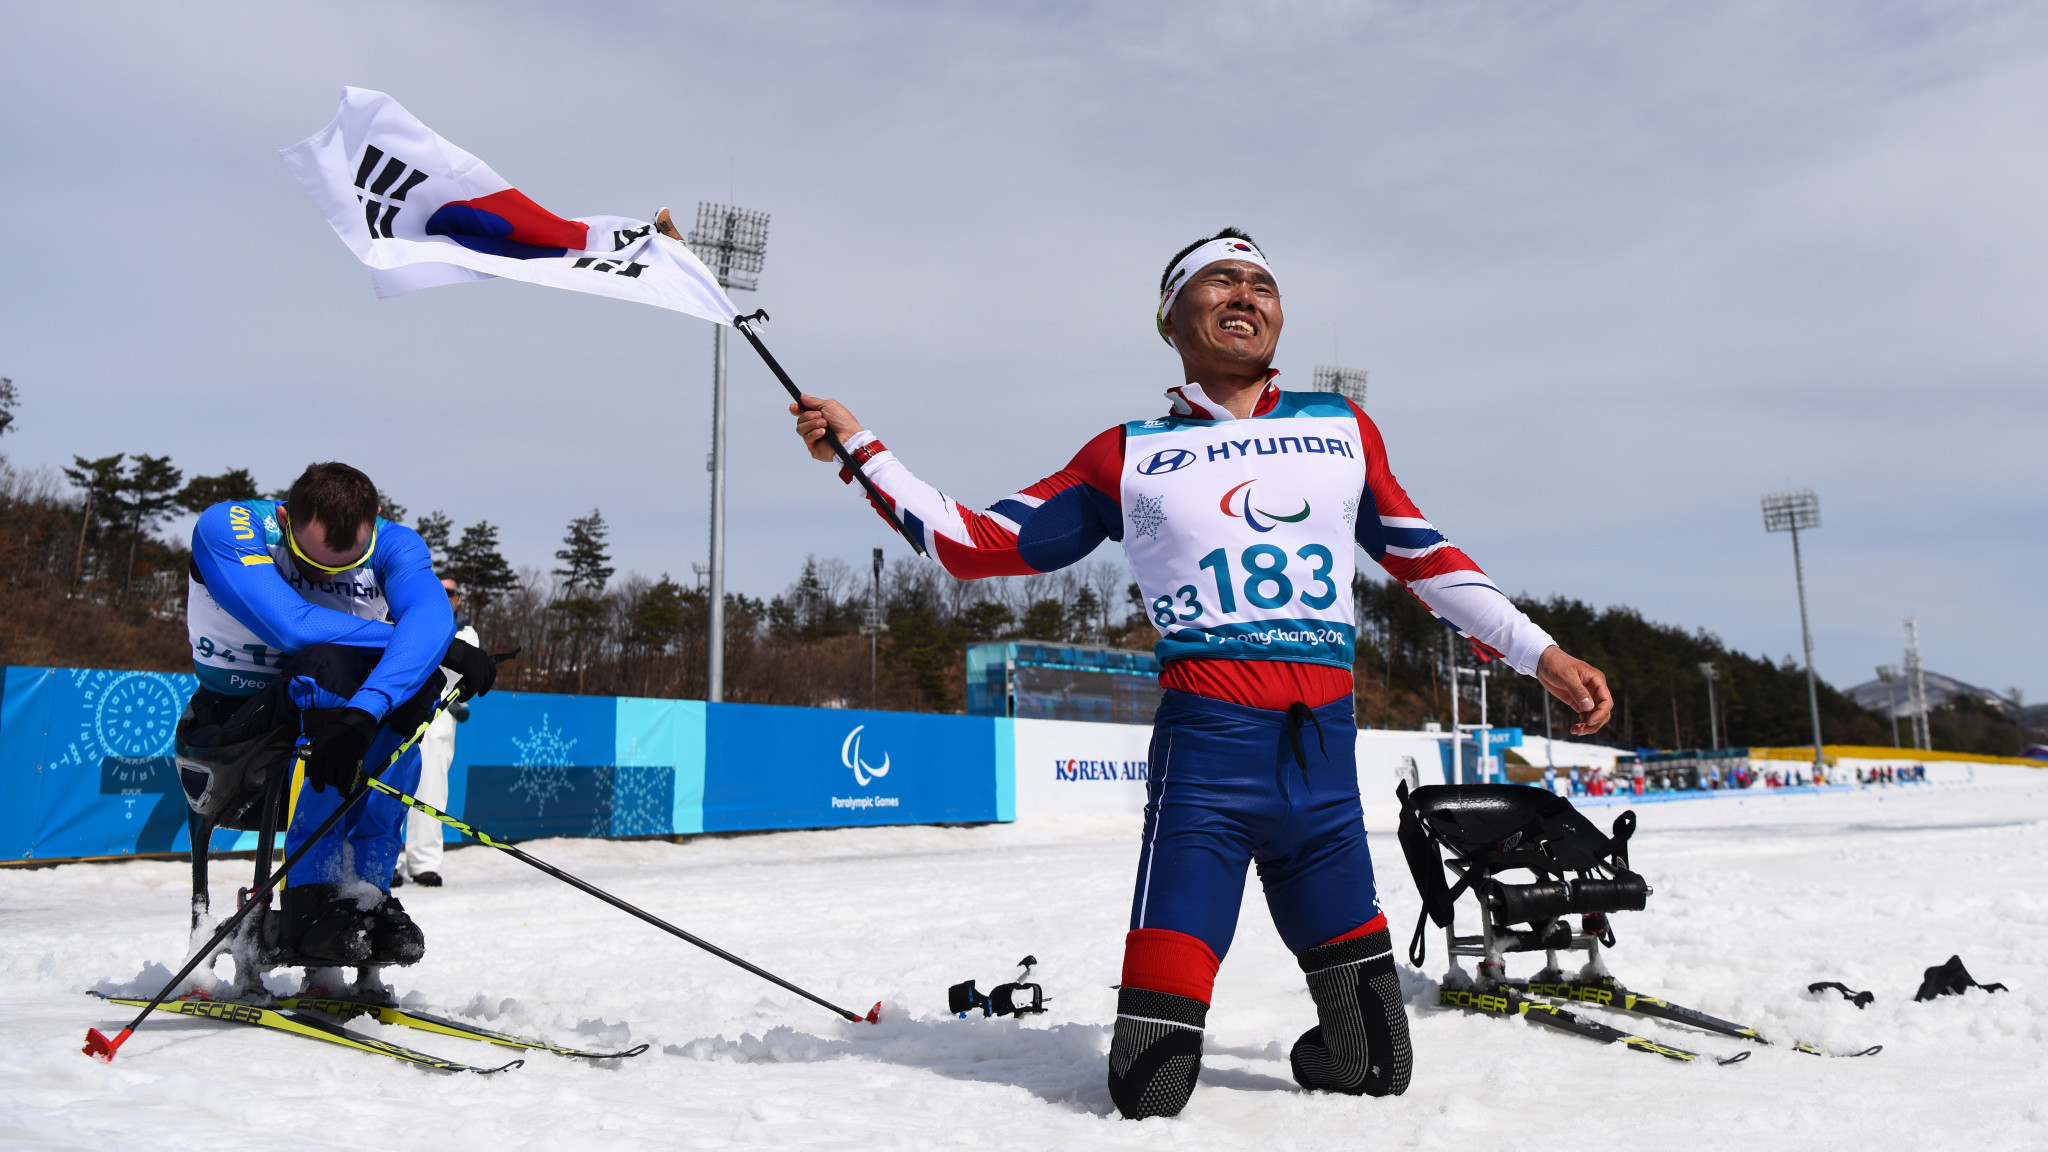 Cross-country skiing gold medallist named South Korea's flagbearer for Pyeongchang 2018 Paralympics Closing Ceremony